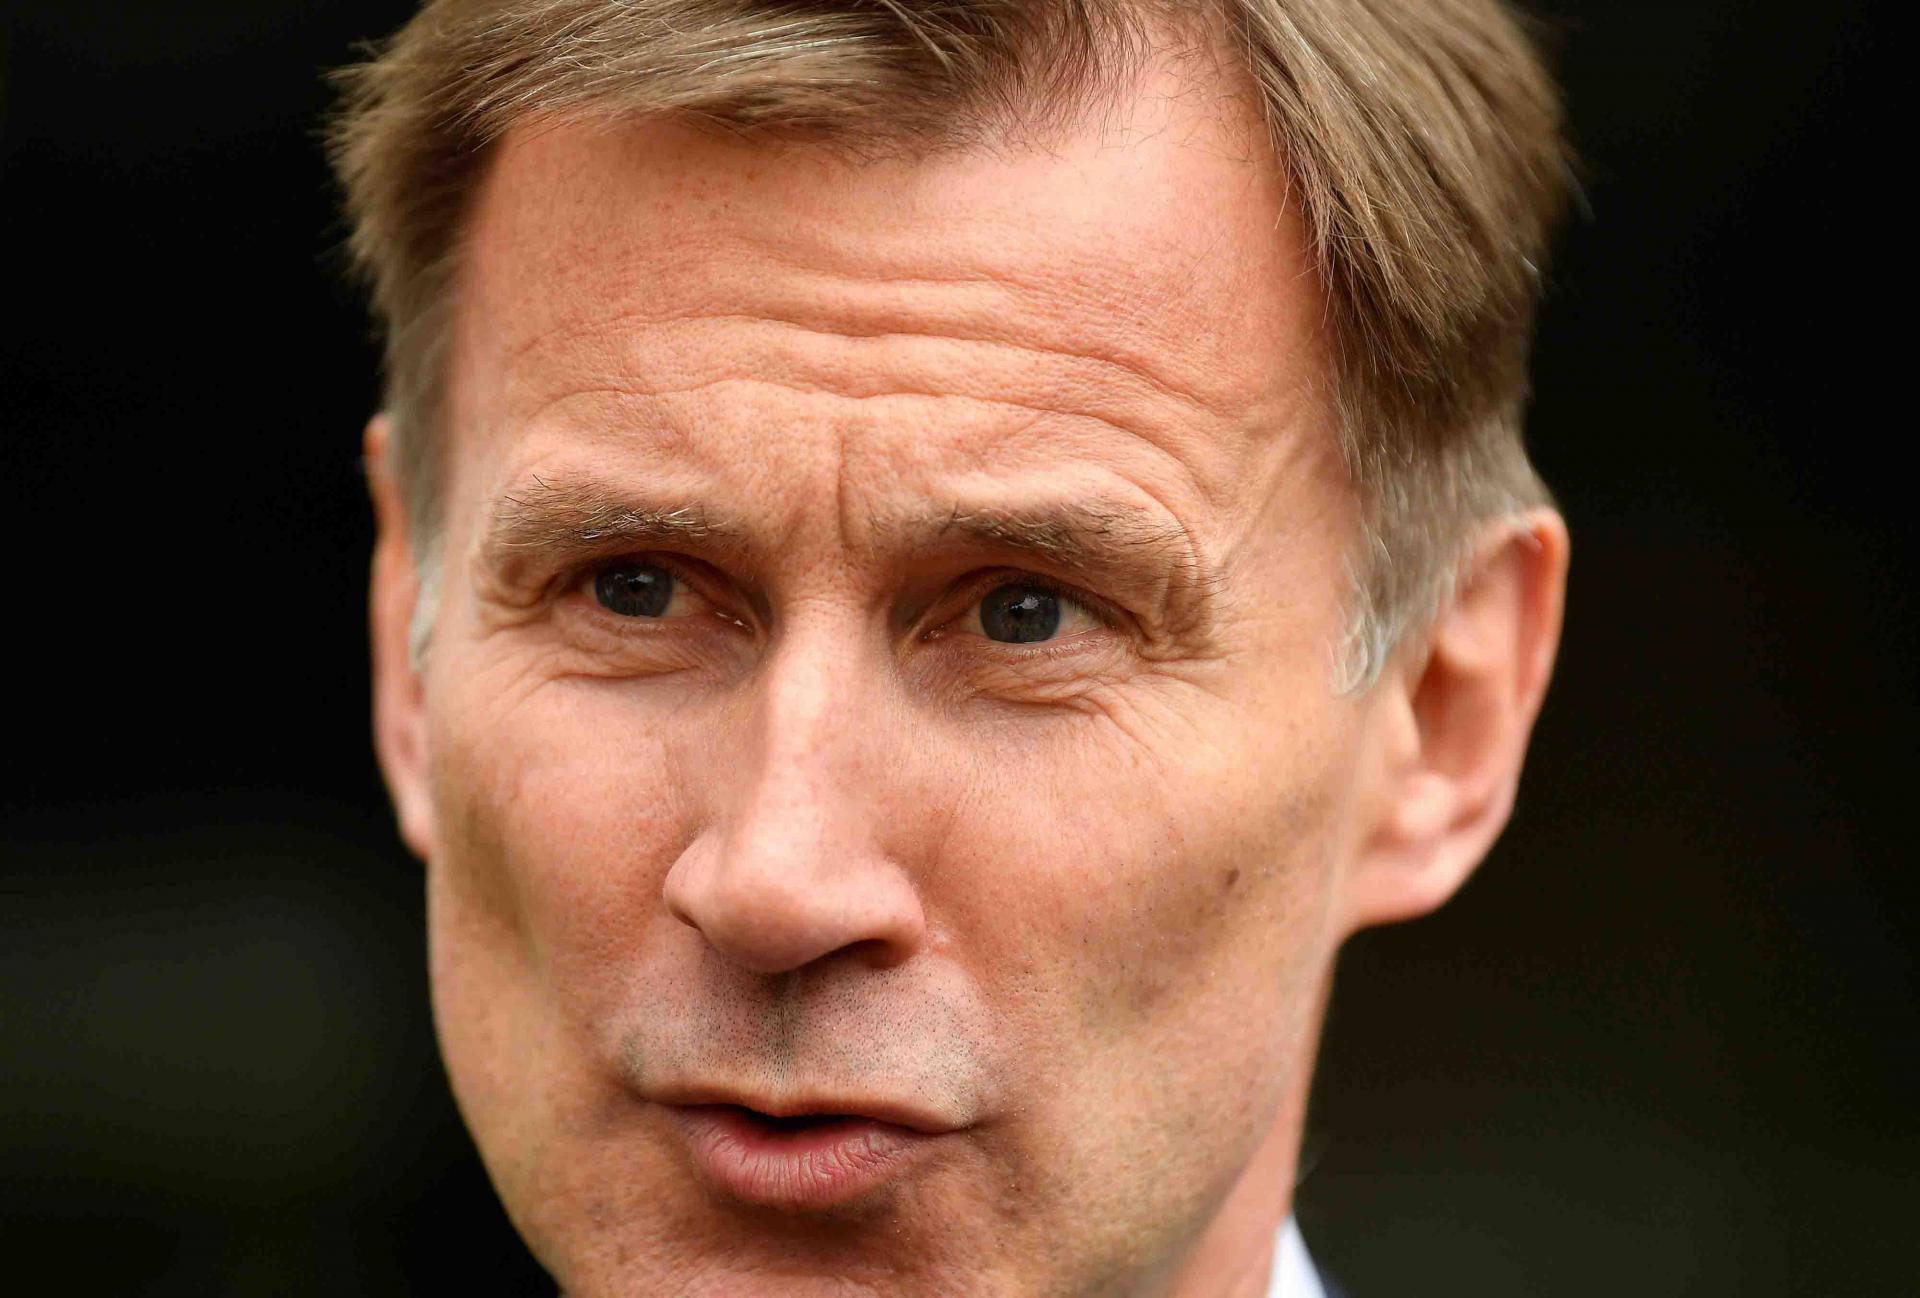 On Friday, British Foreign Secretary Jeremy Hunt said London had concluded Iran was "almost certainly" responsible